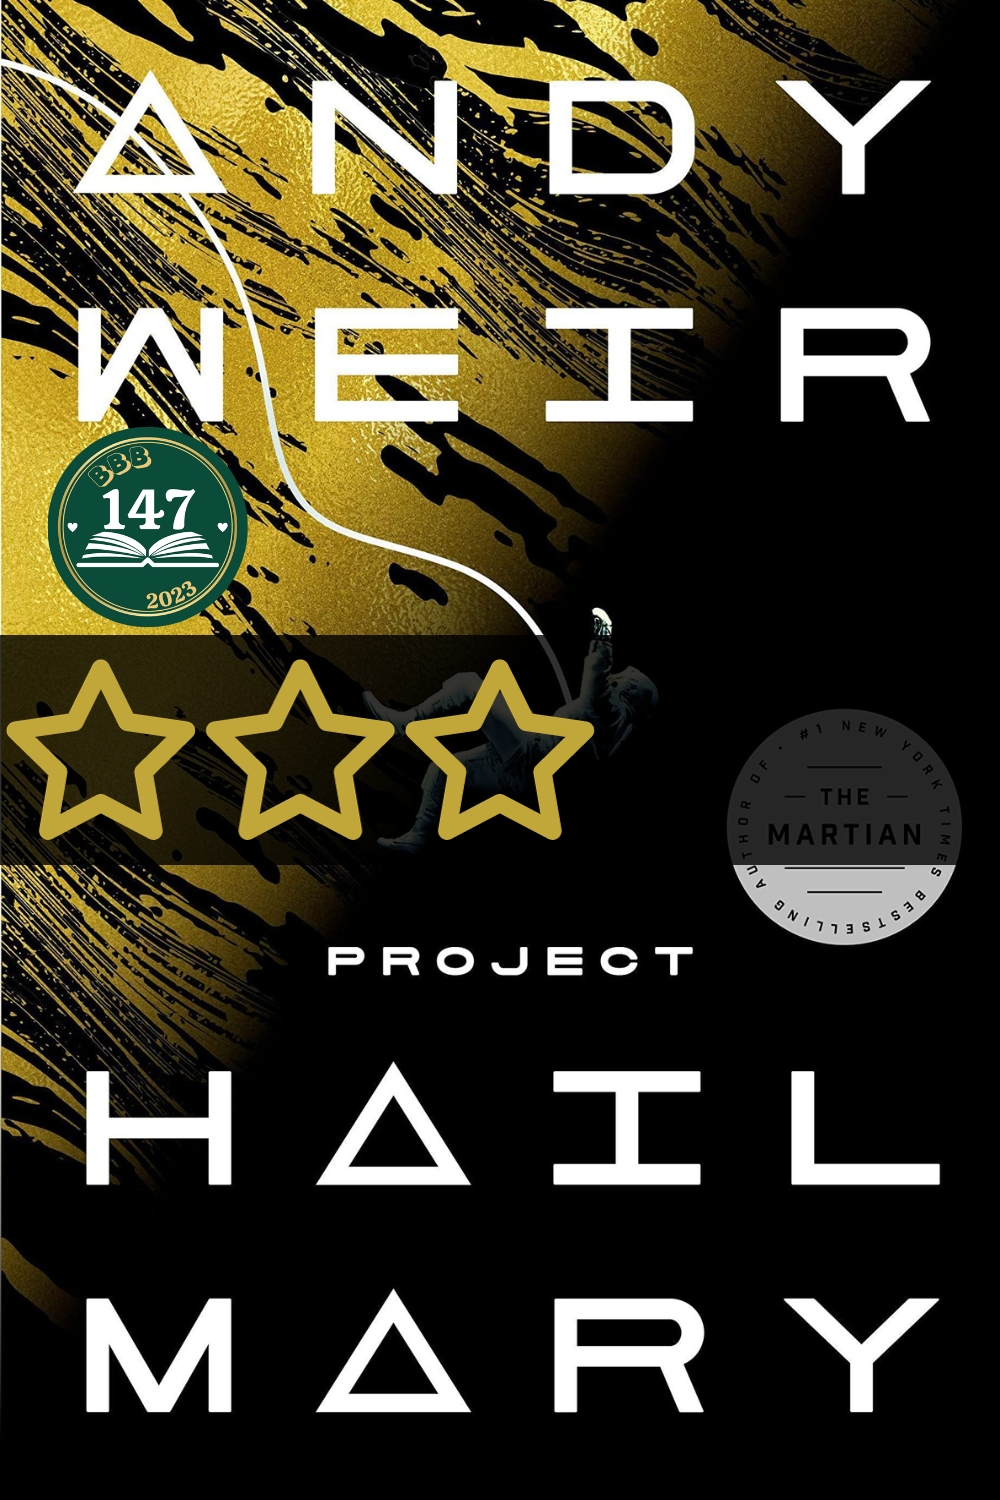 Project Hail Mary – Andy Weir